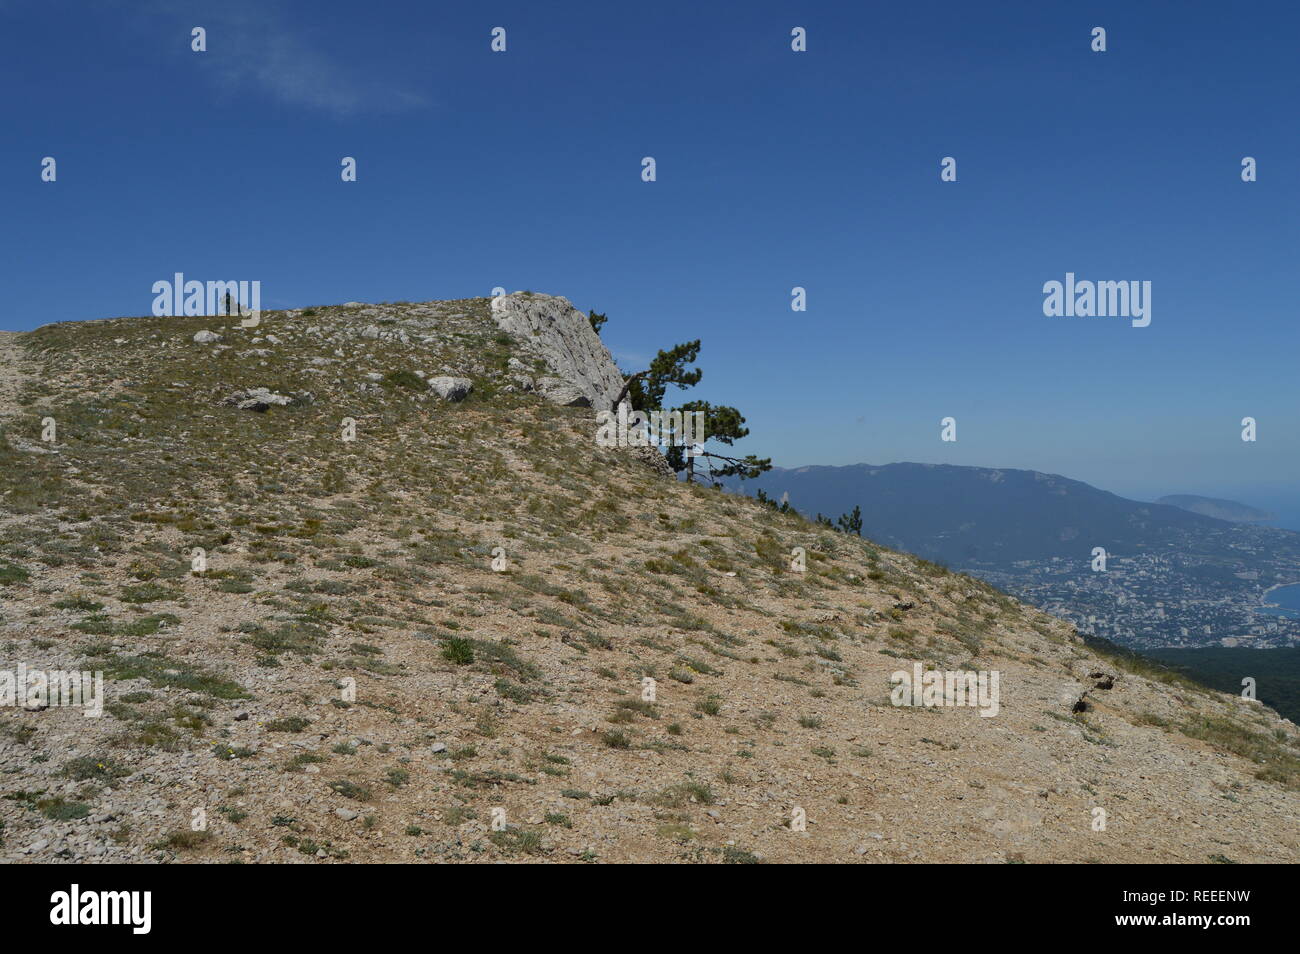 A lonely pine tree with a curving trunk on a mountainside, against a blue sky. Stock Photo